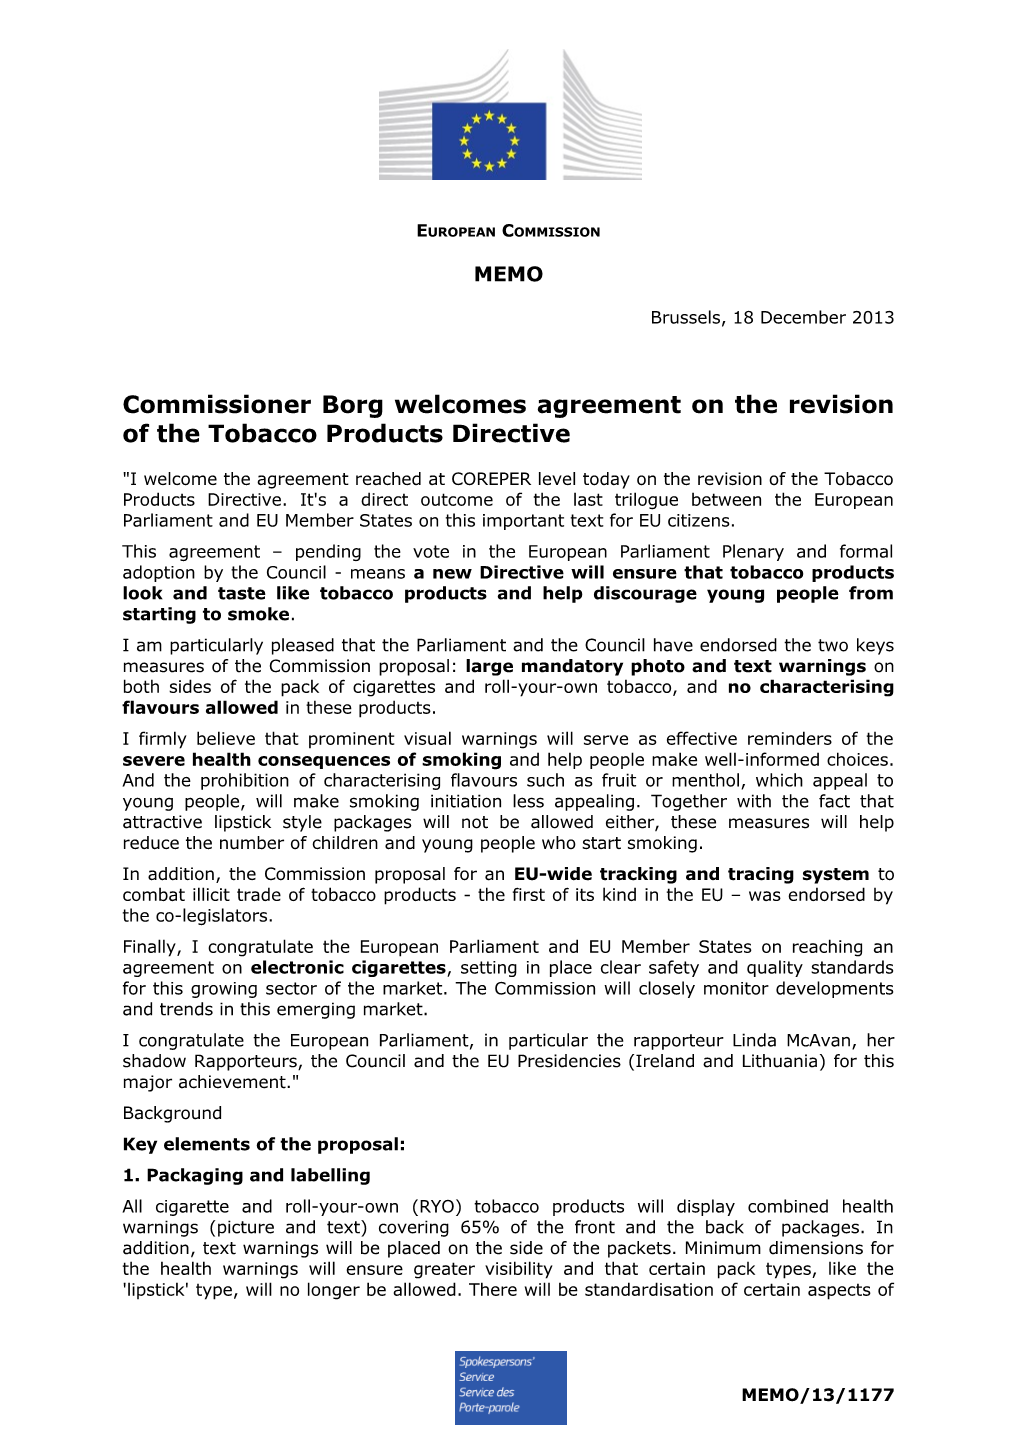 Commissioner Borg Welcomes Agreement on the Revision of the Tobacco Products Directive